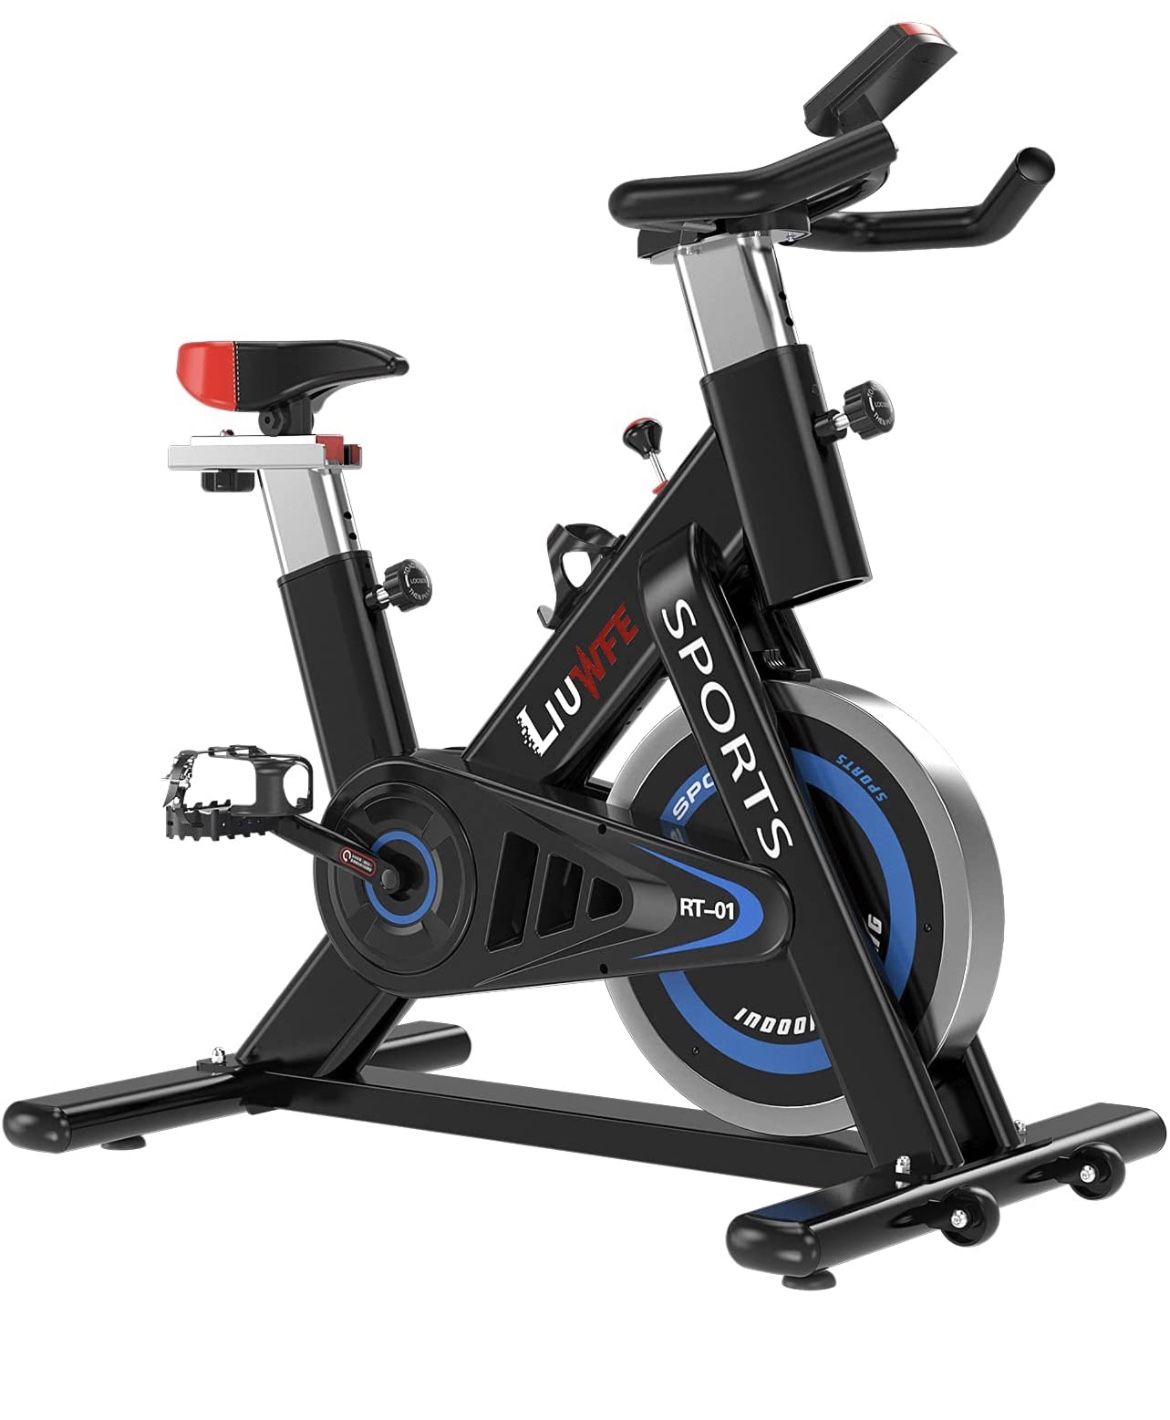 Stationary Spinning Bike New In Box 